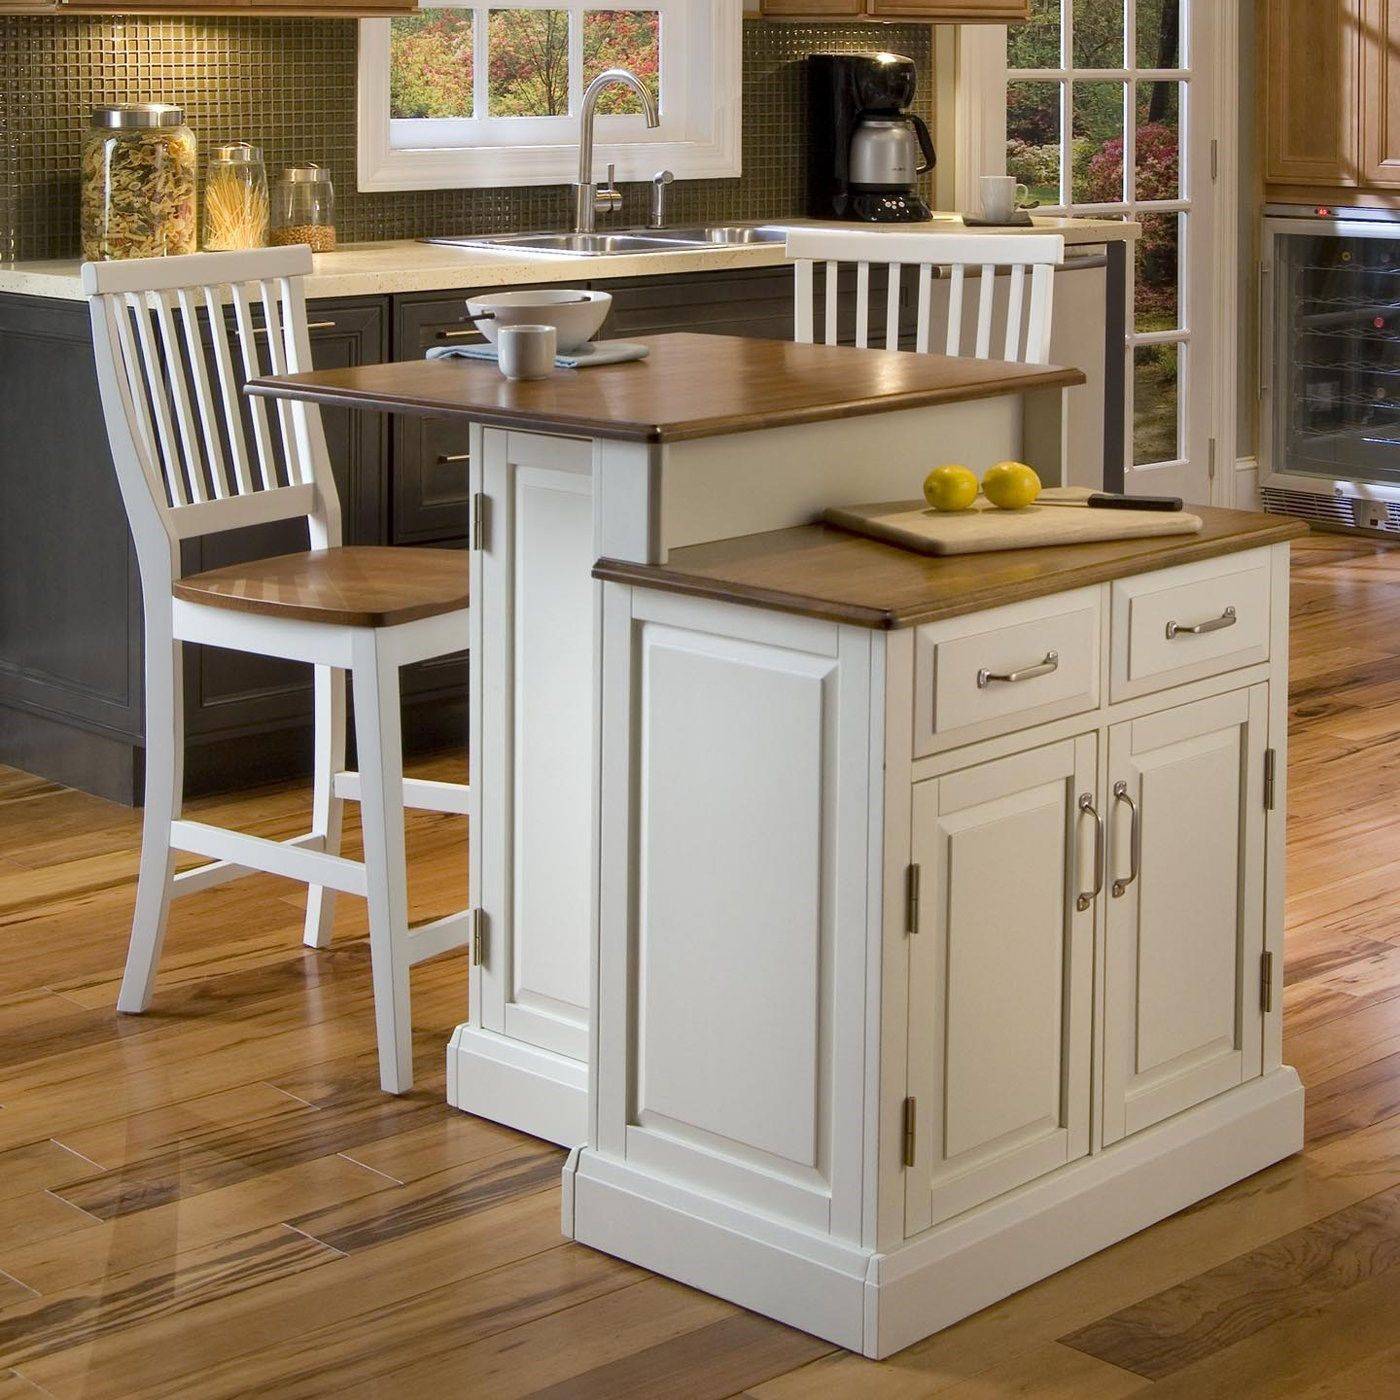 Two-tier kitchen island with matching chairs